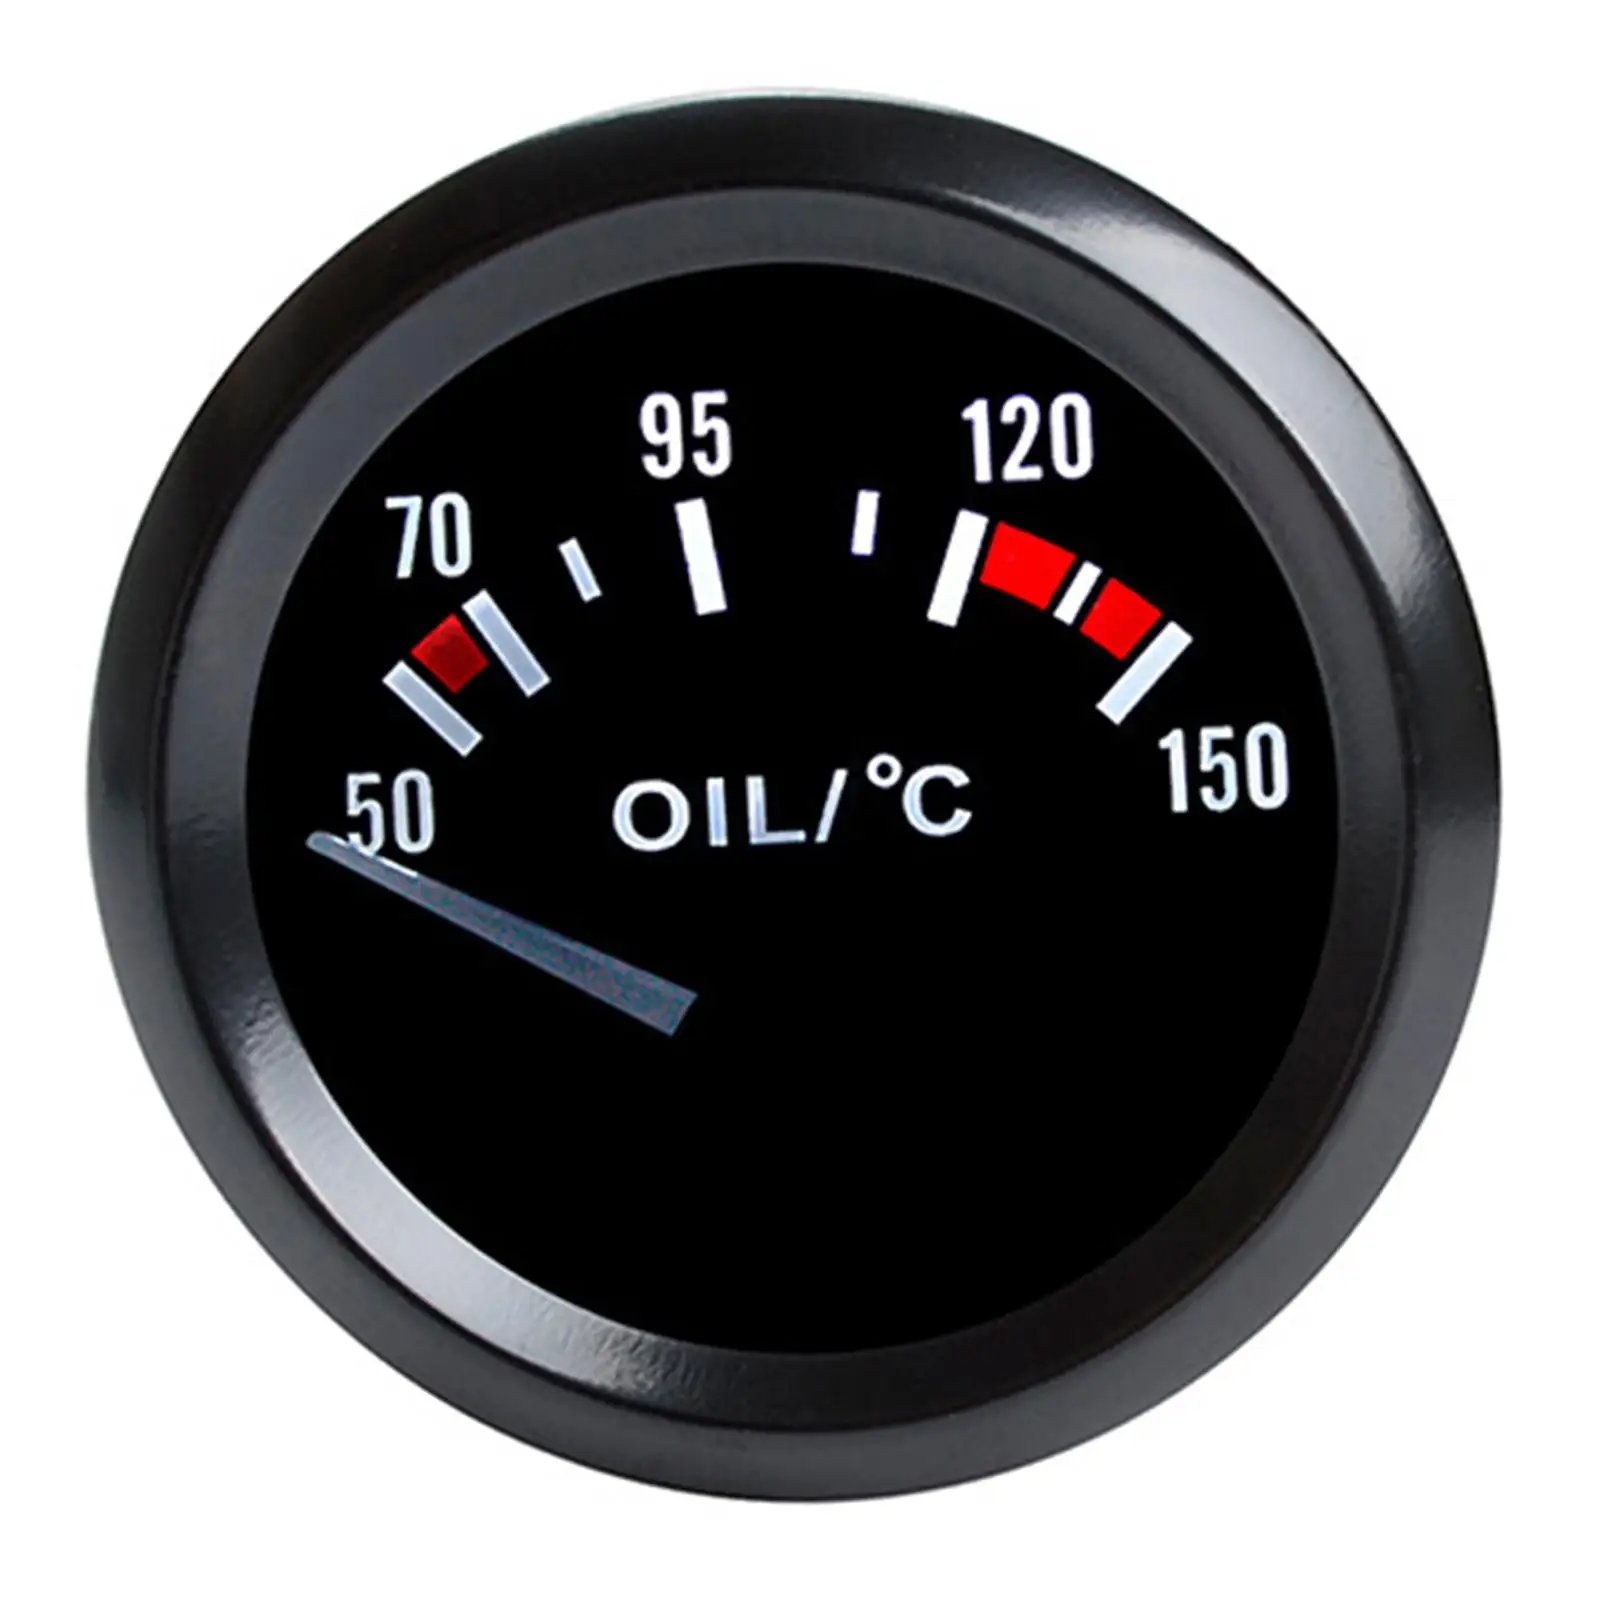 Oil Temp Gauge Car Accessories 12V Replaces 52mm for Vehicle Car Truck